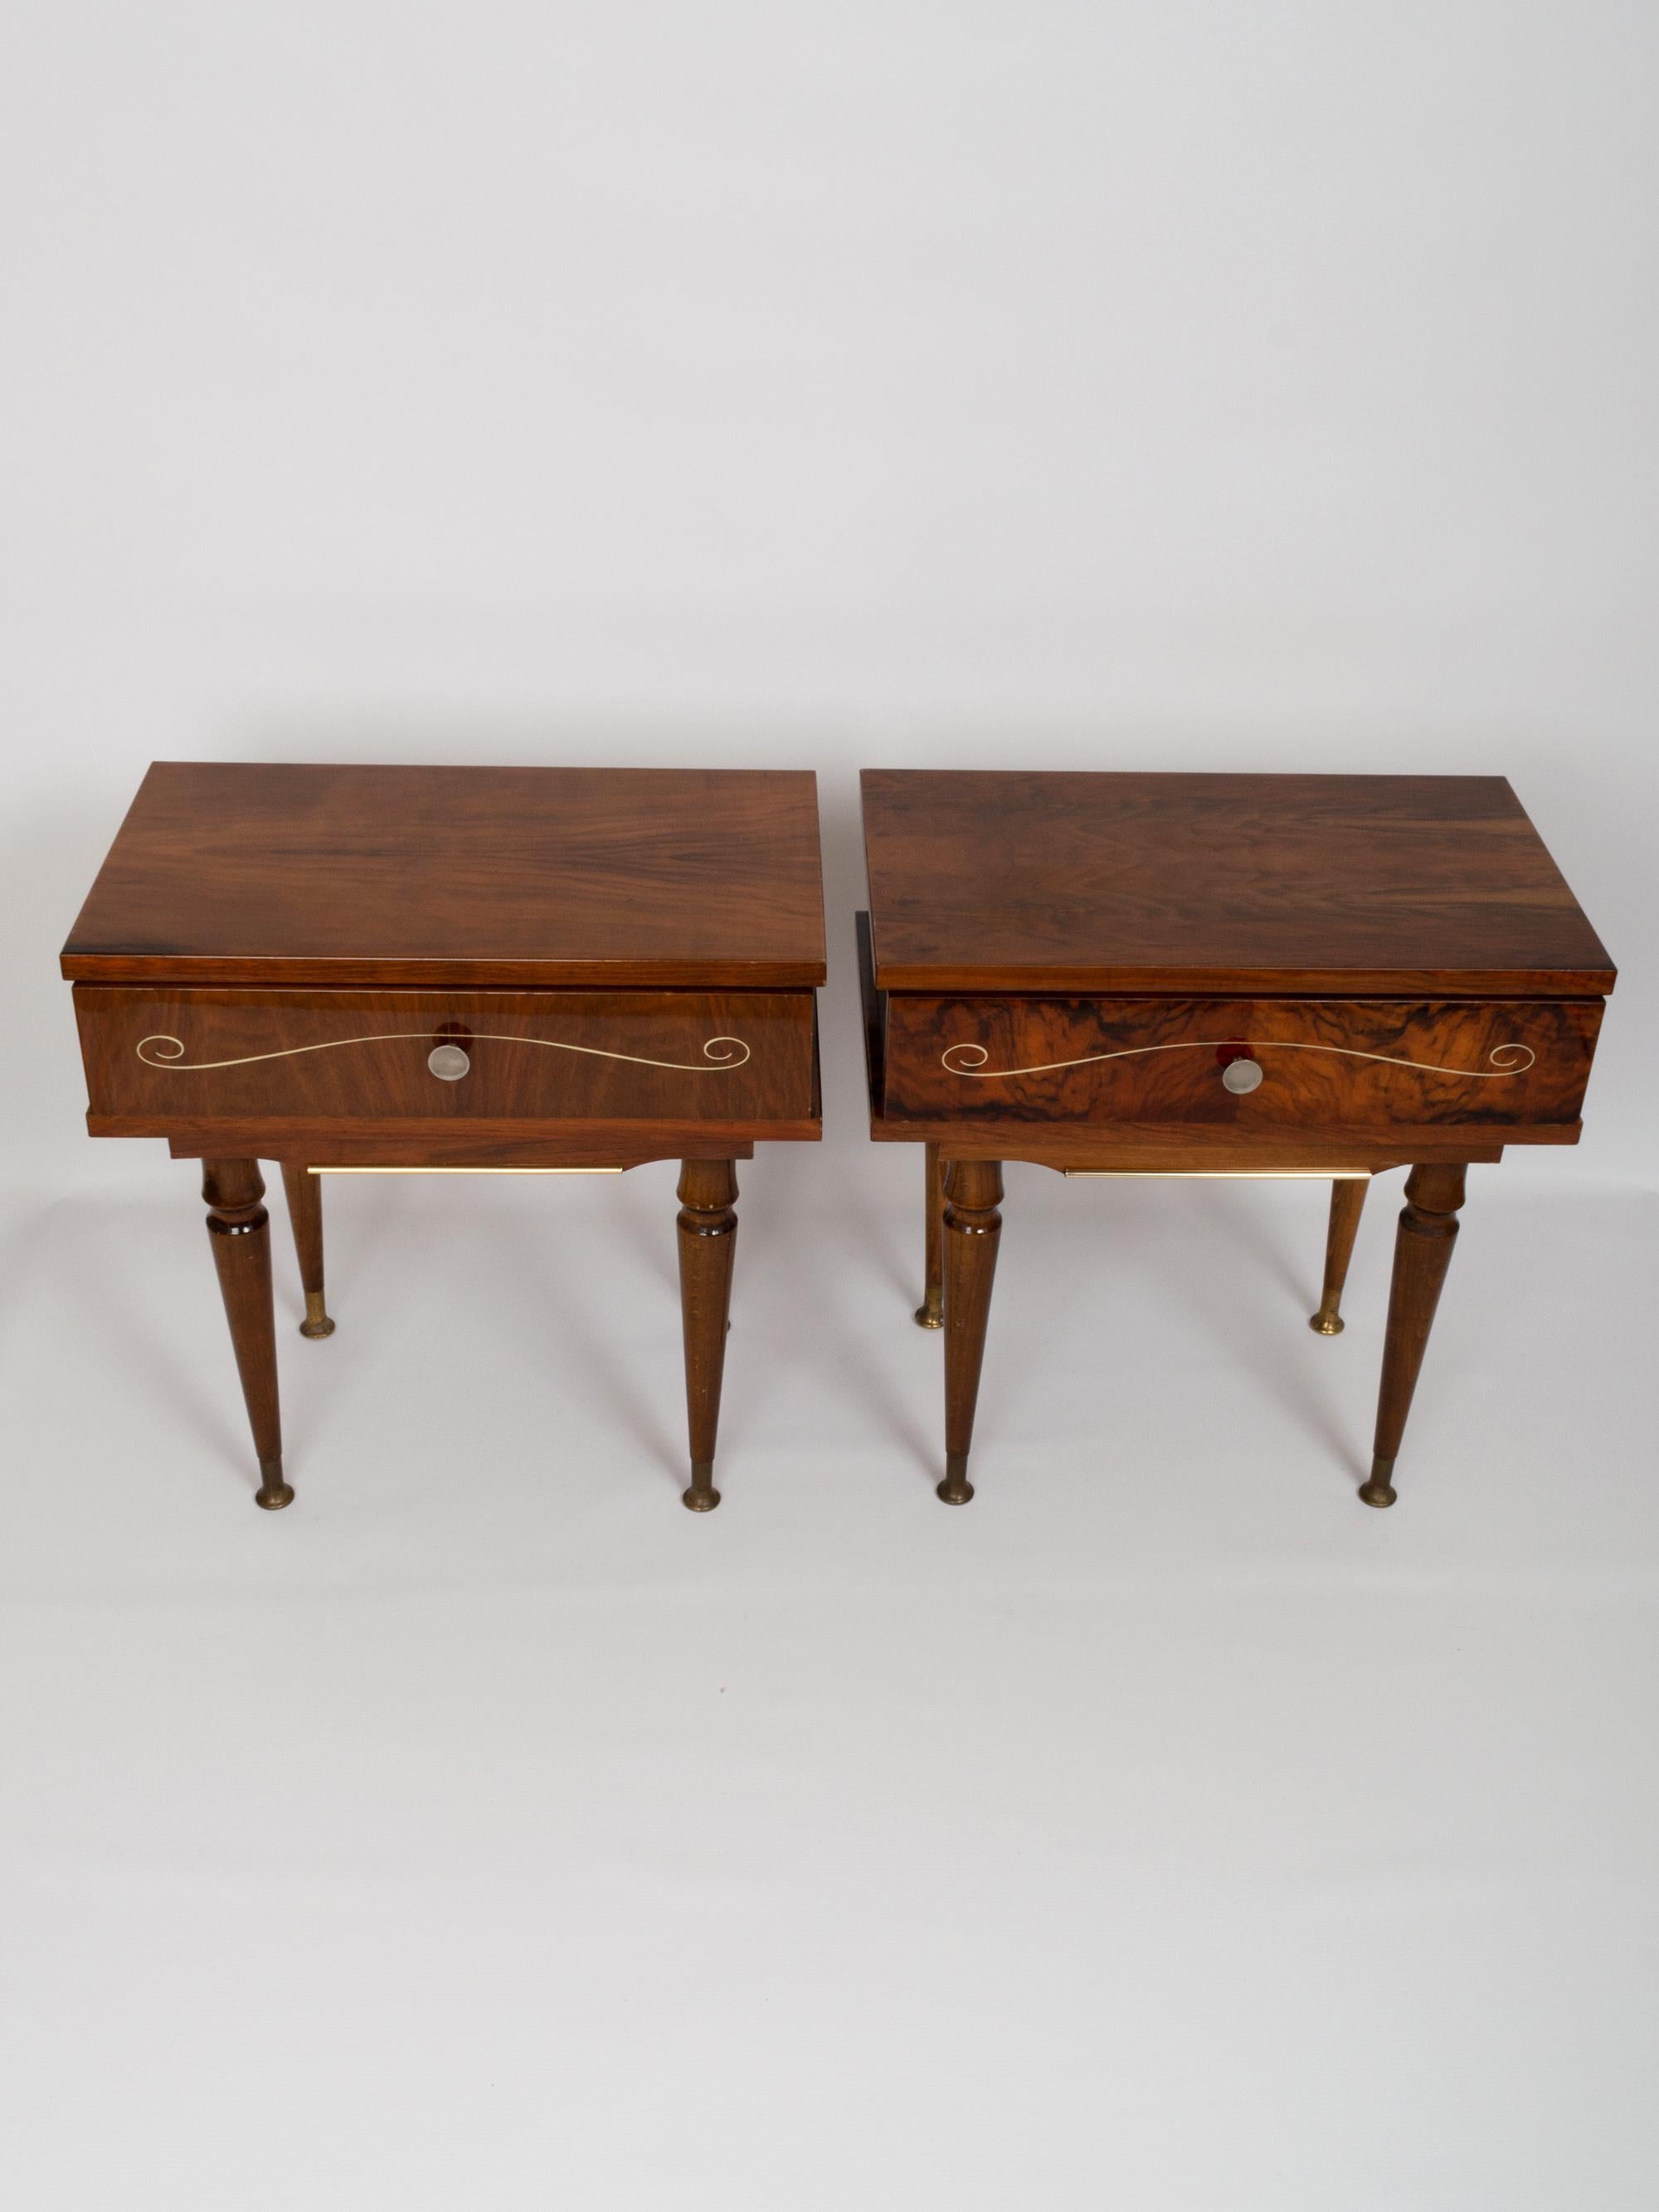 Mid-20th Century Pair of French Art Deco Figured Walnut Nightstands Bedside Cabinets, circa 1960 For Sale